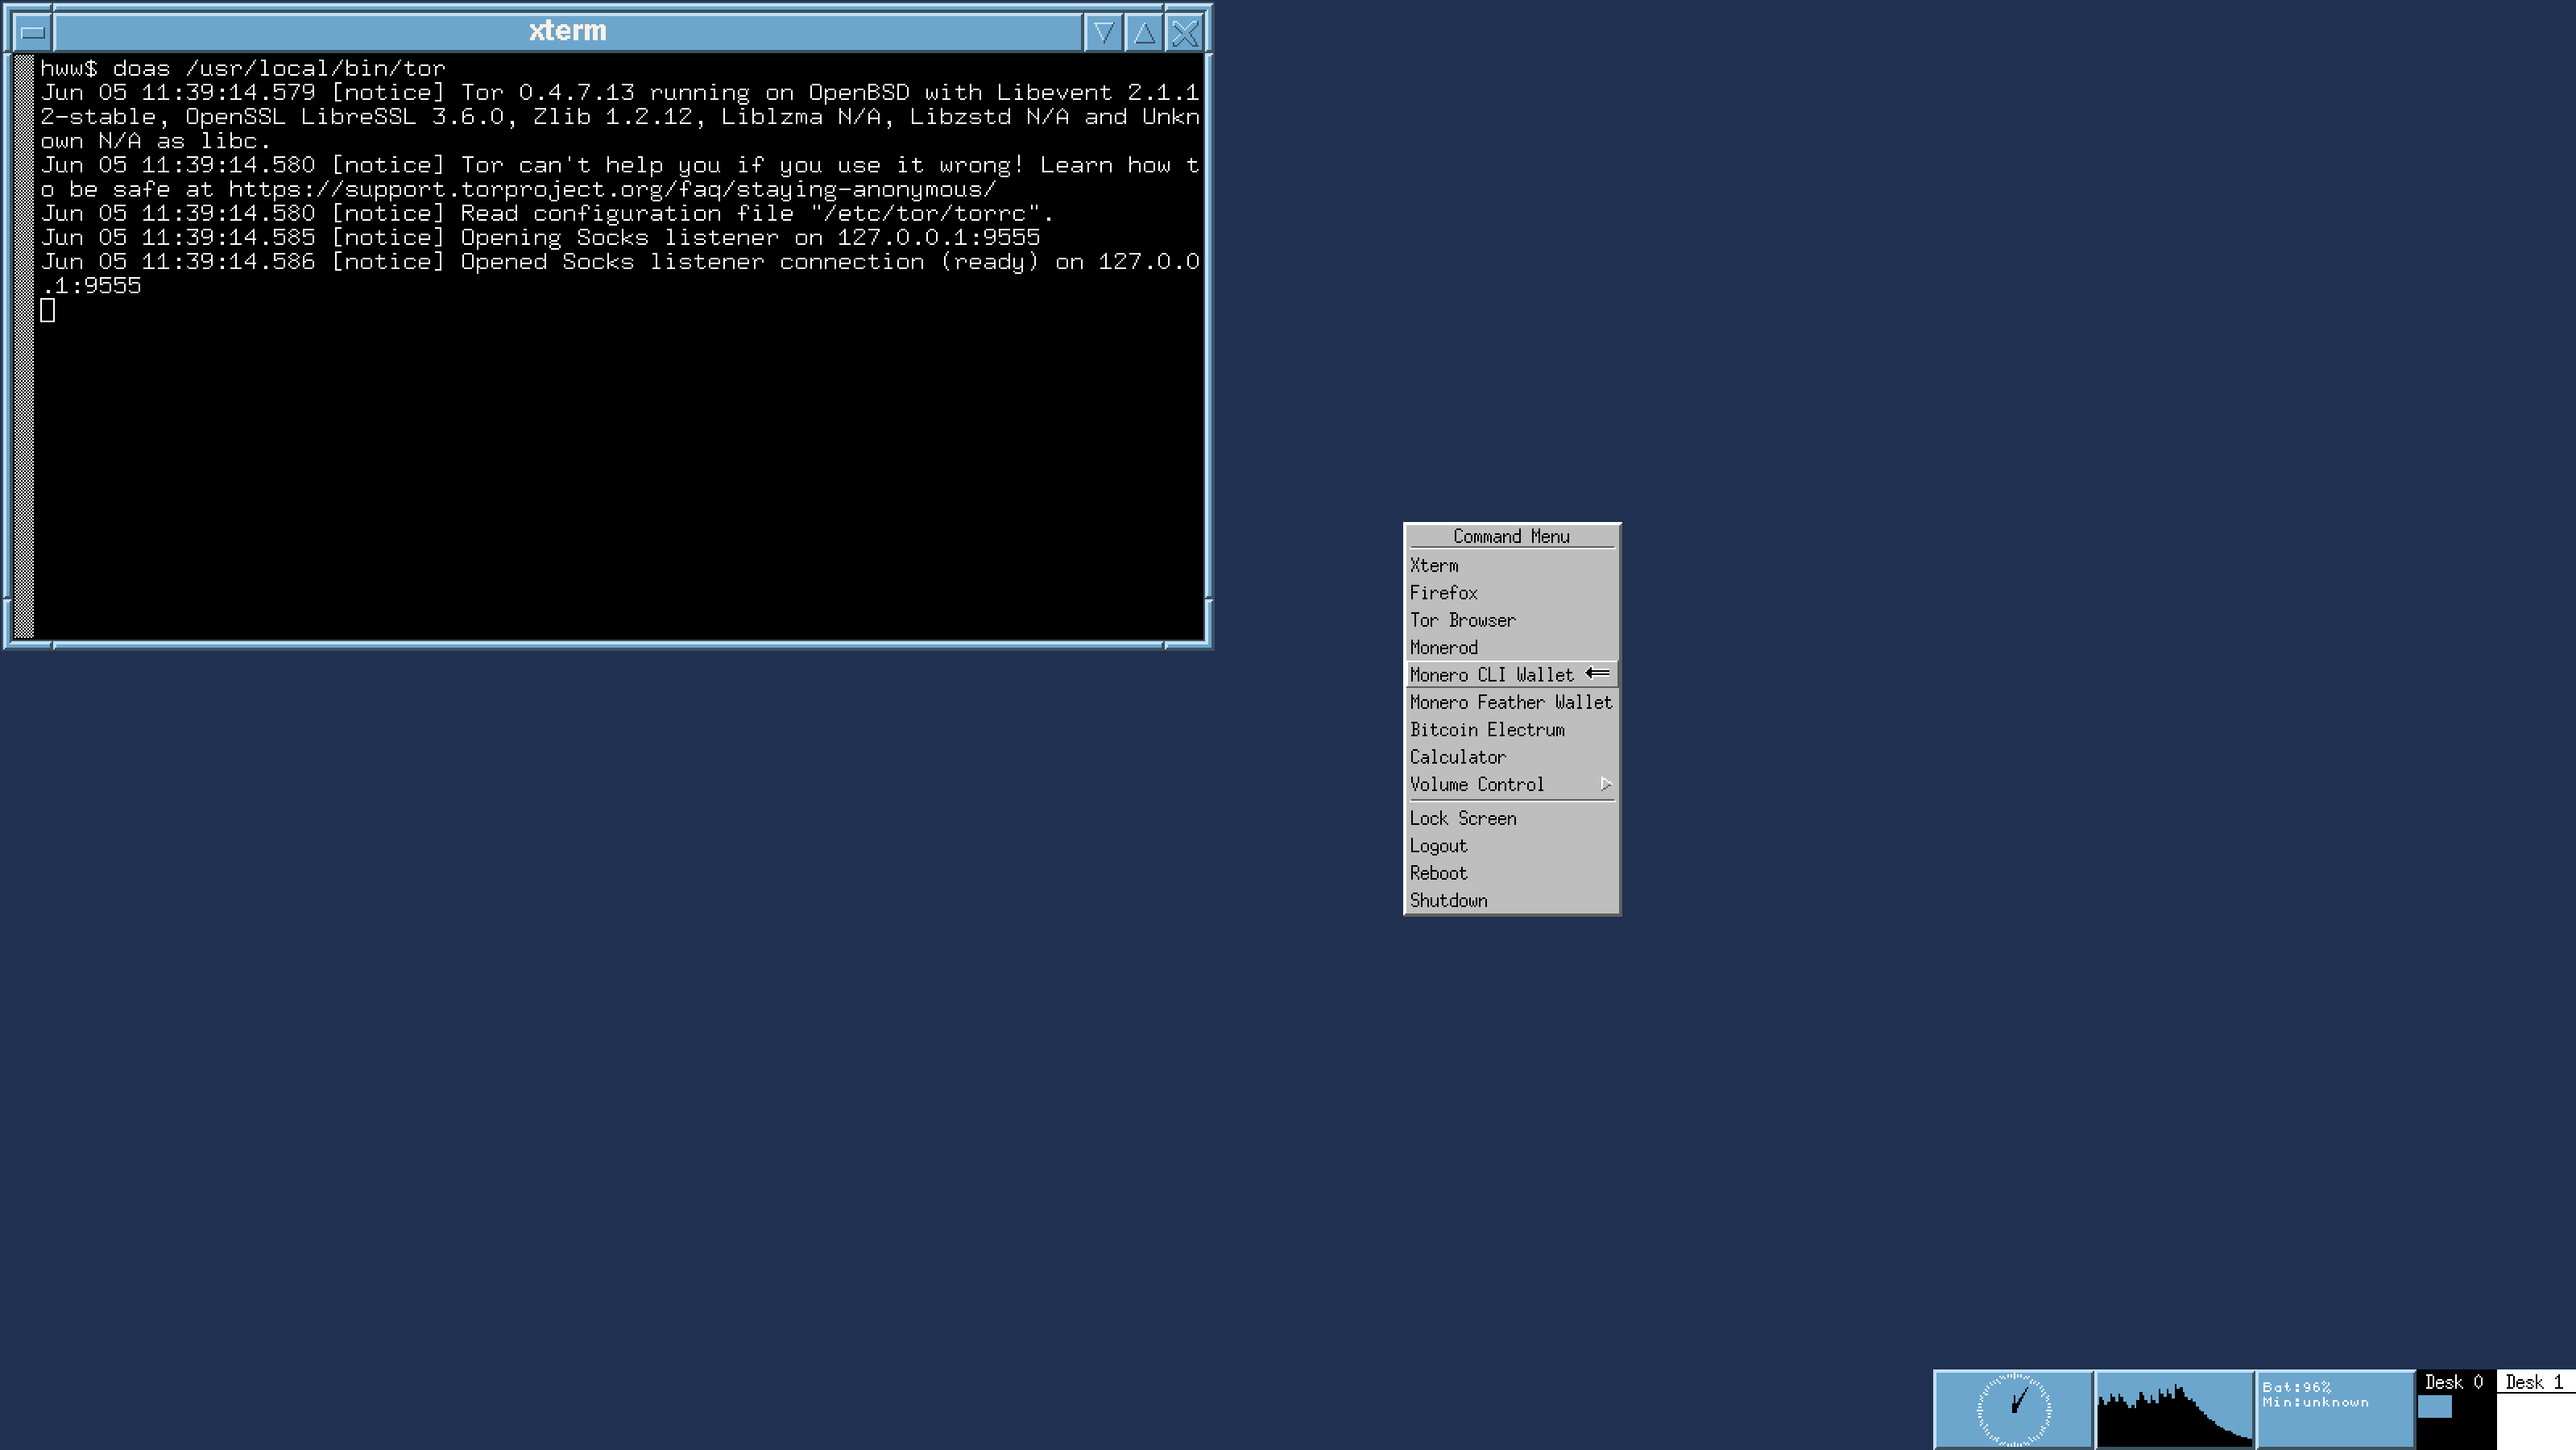 OpenHWW: OpenBSD fvwm desktop. Right-click the screen by mouse to see a context menu like in Windows OS